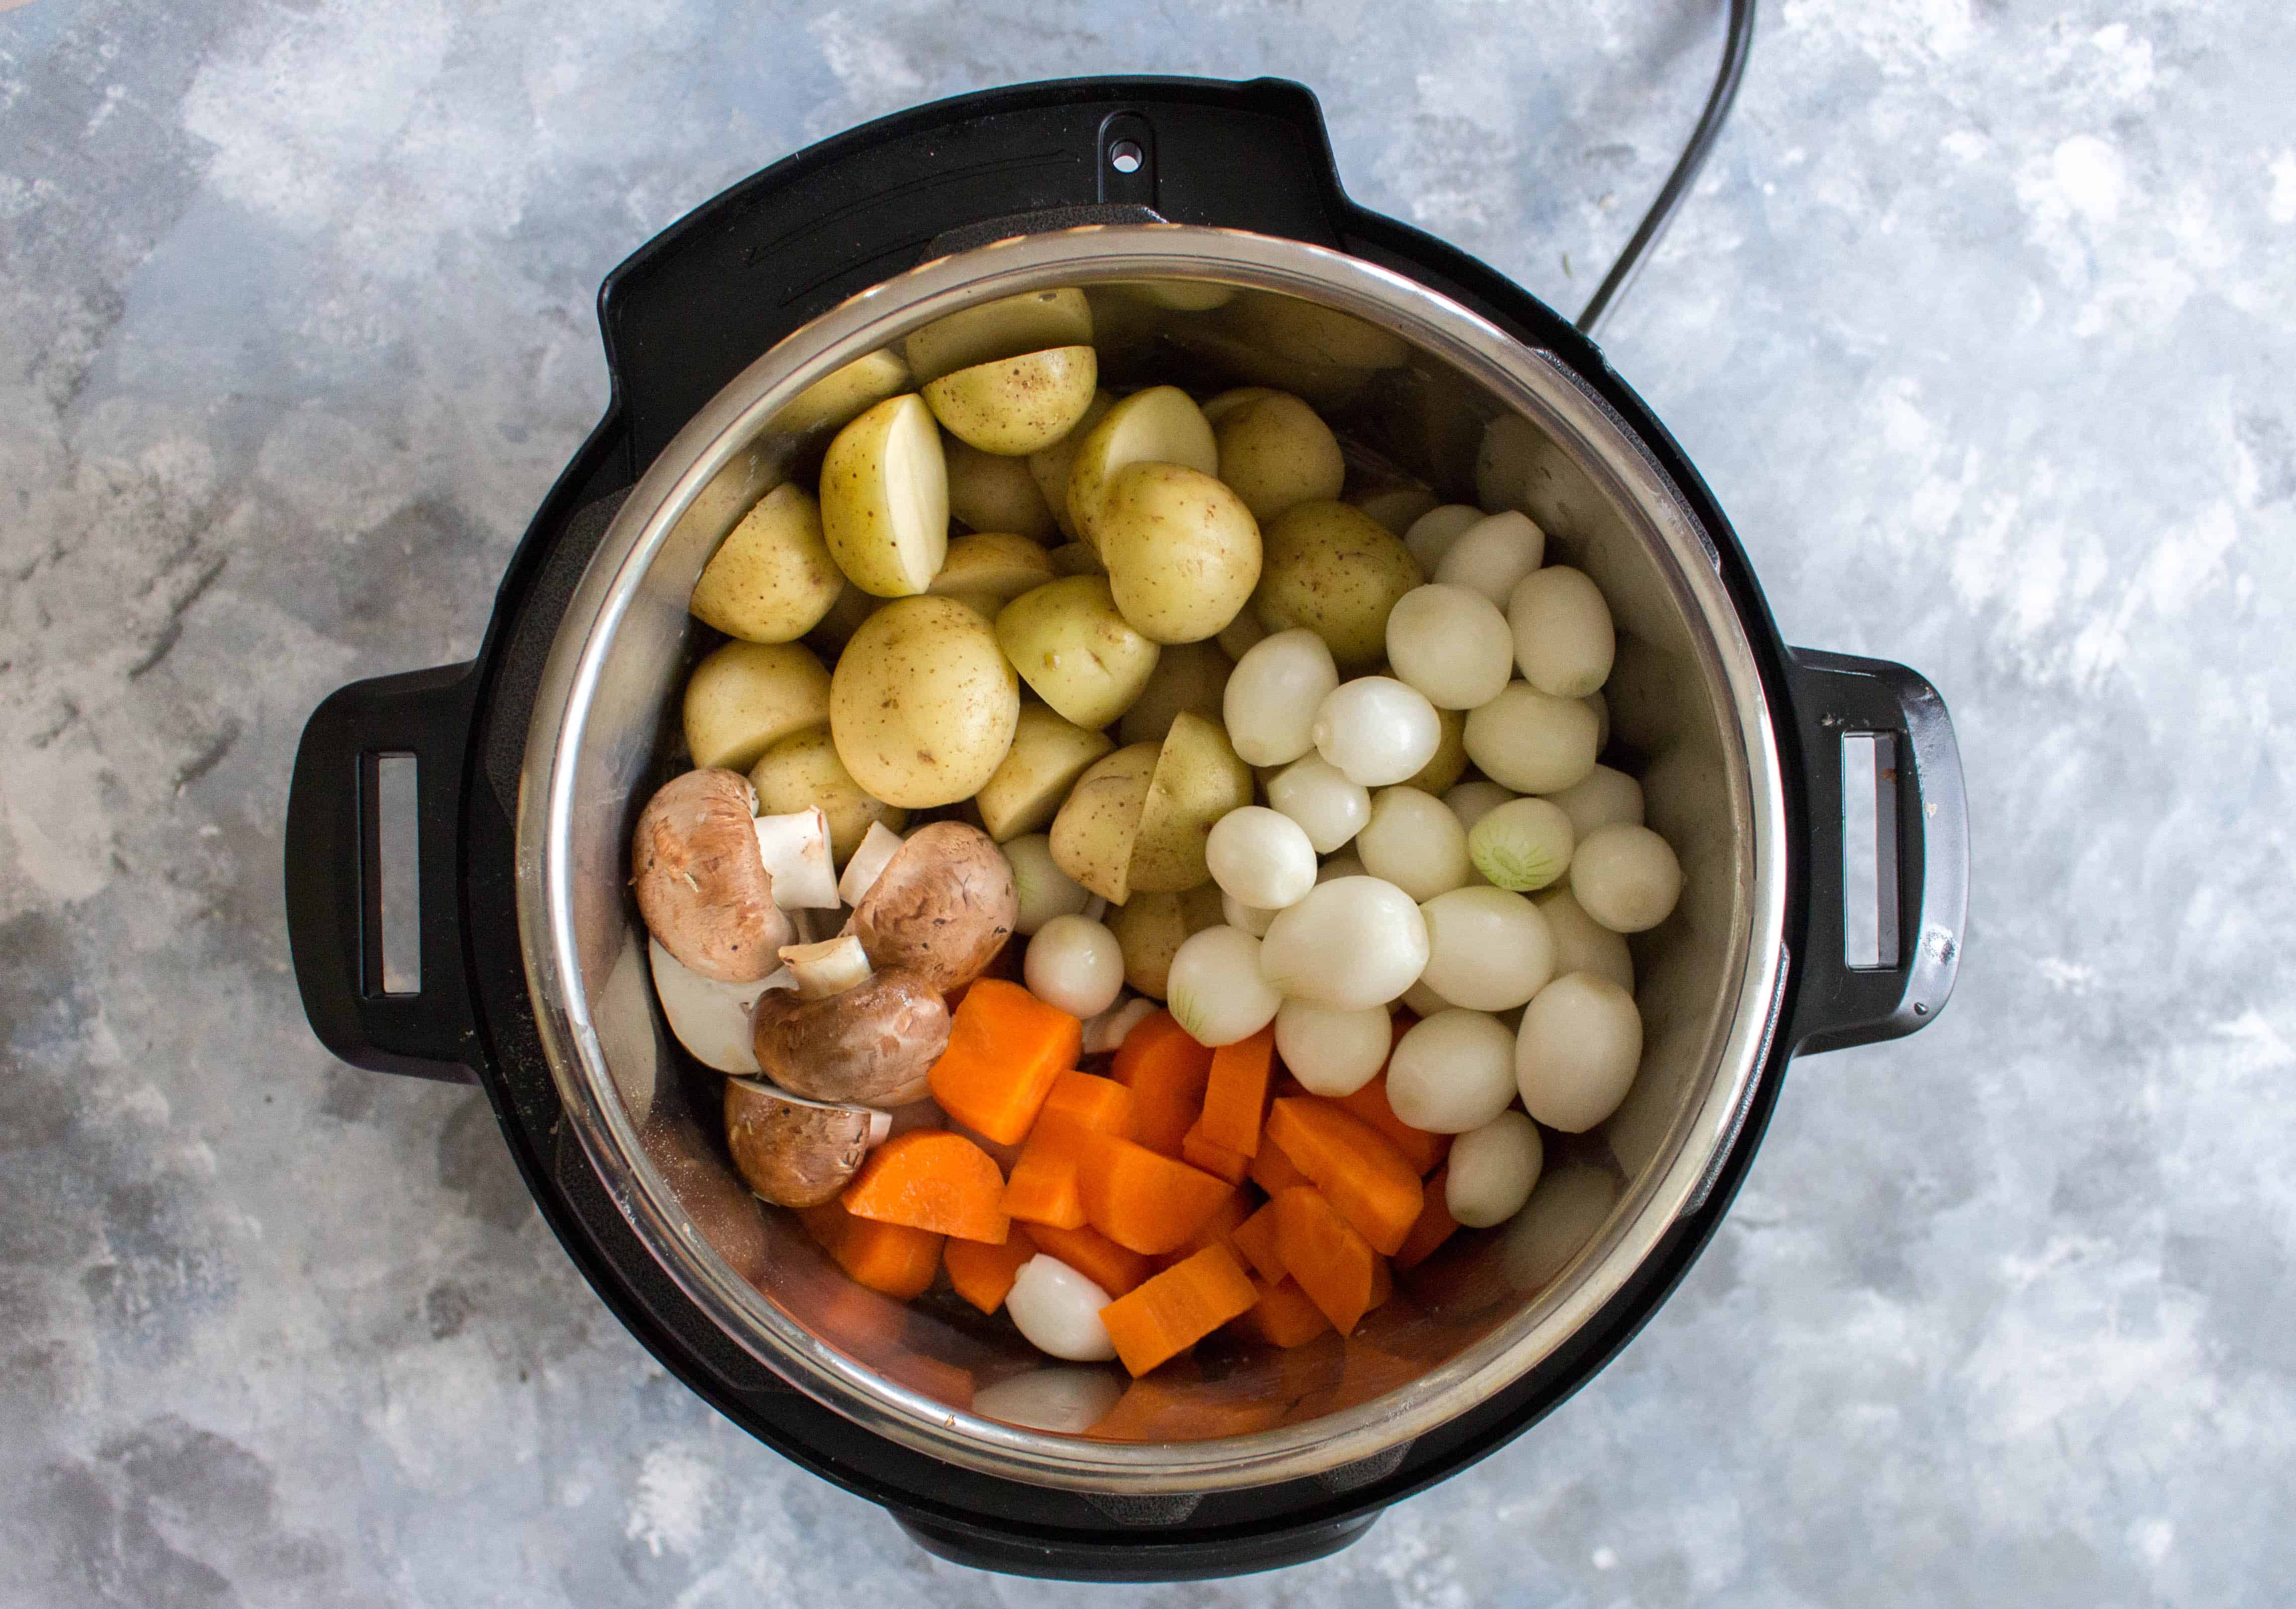 instant pot on table filled with potatoes, pearl onions, carrots, and mushrooms